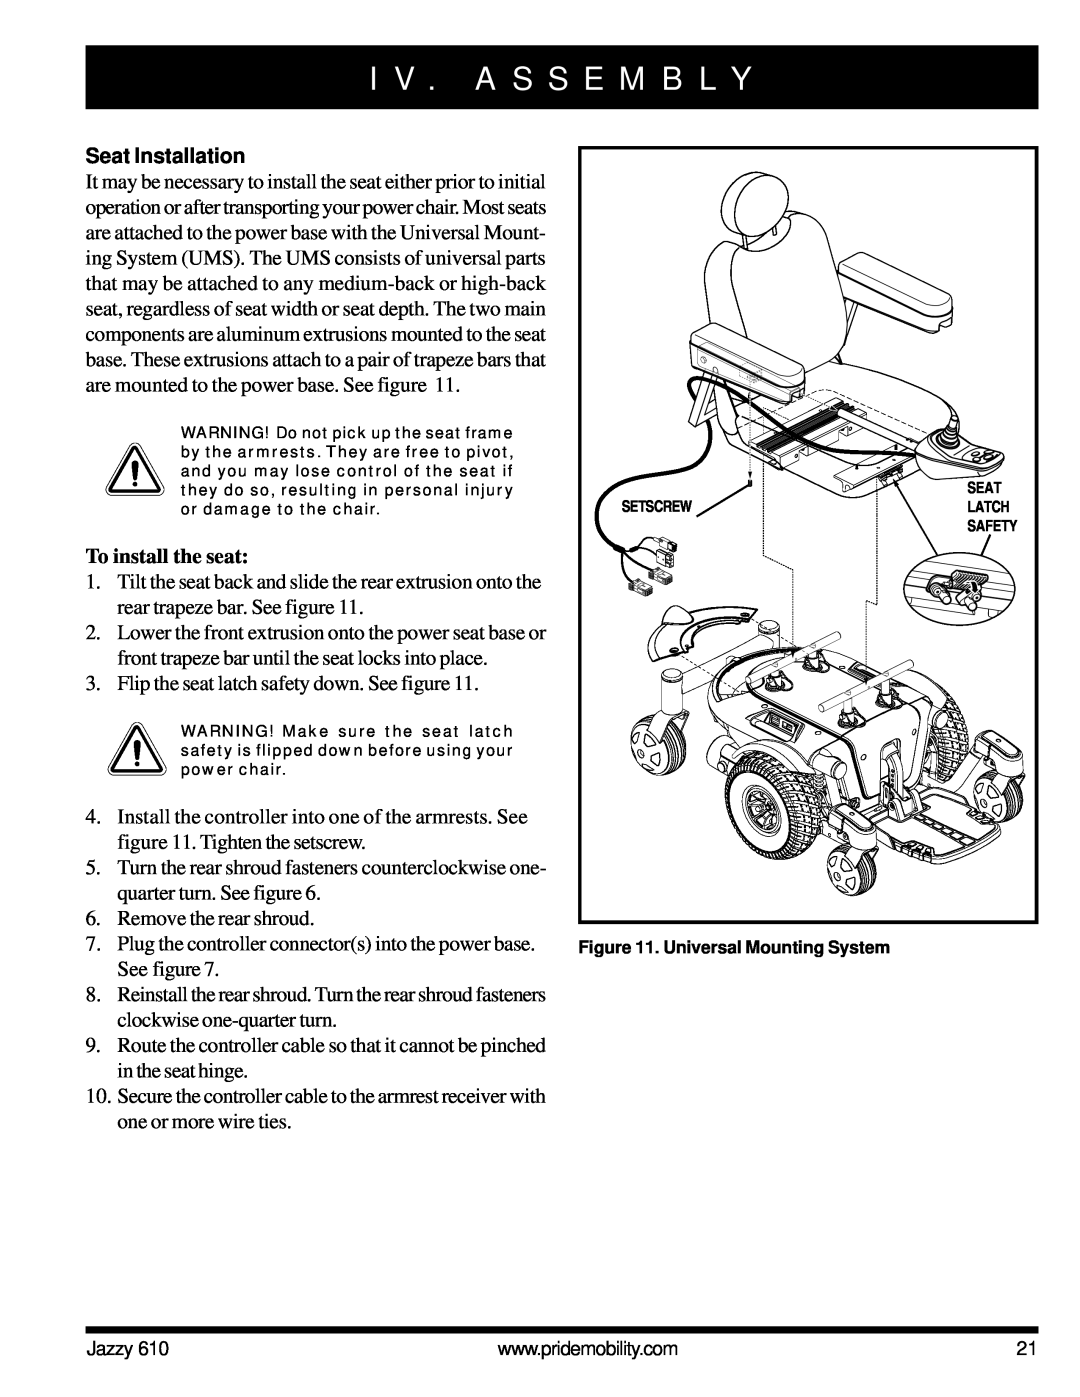 Pride Mobility 610 owner manual Seat Installation, To install the seat, I V . A S S E M B L Y 